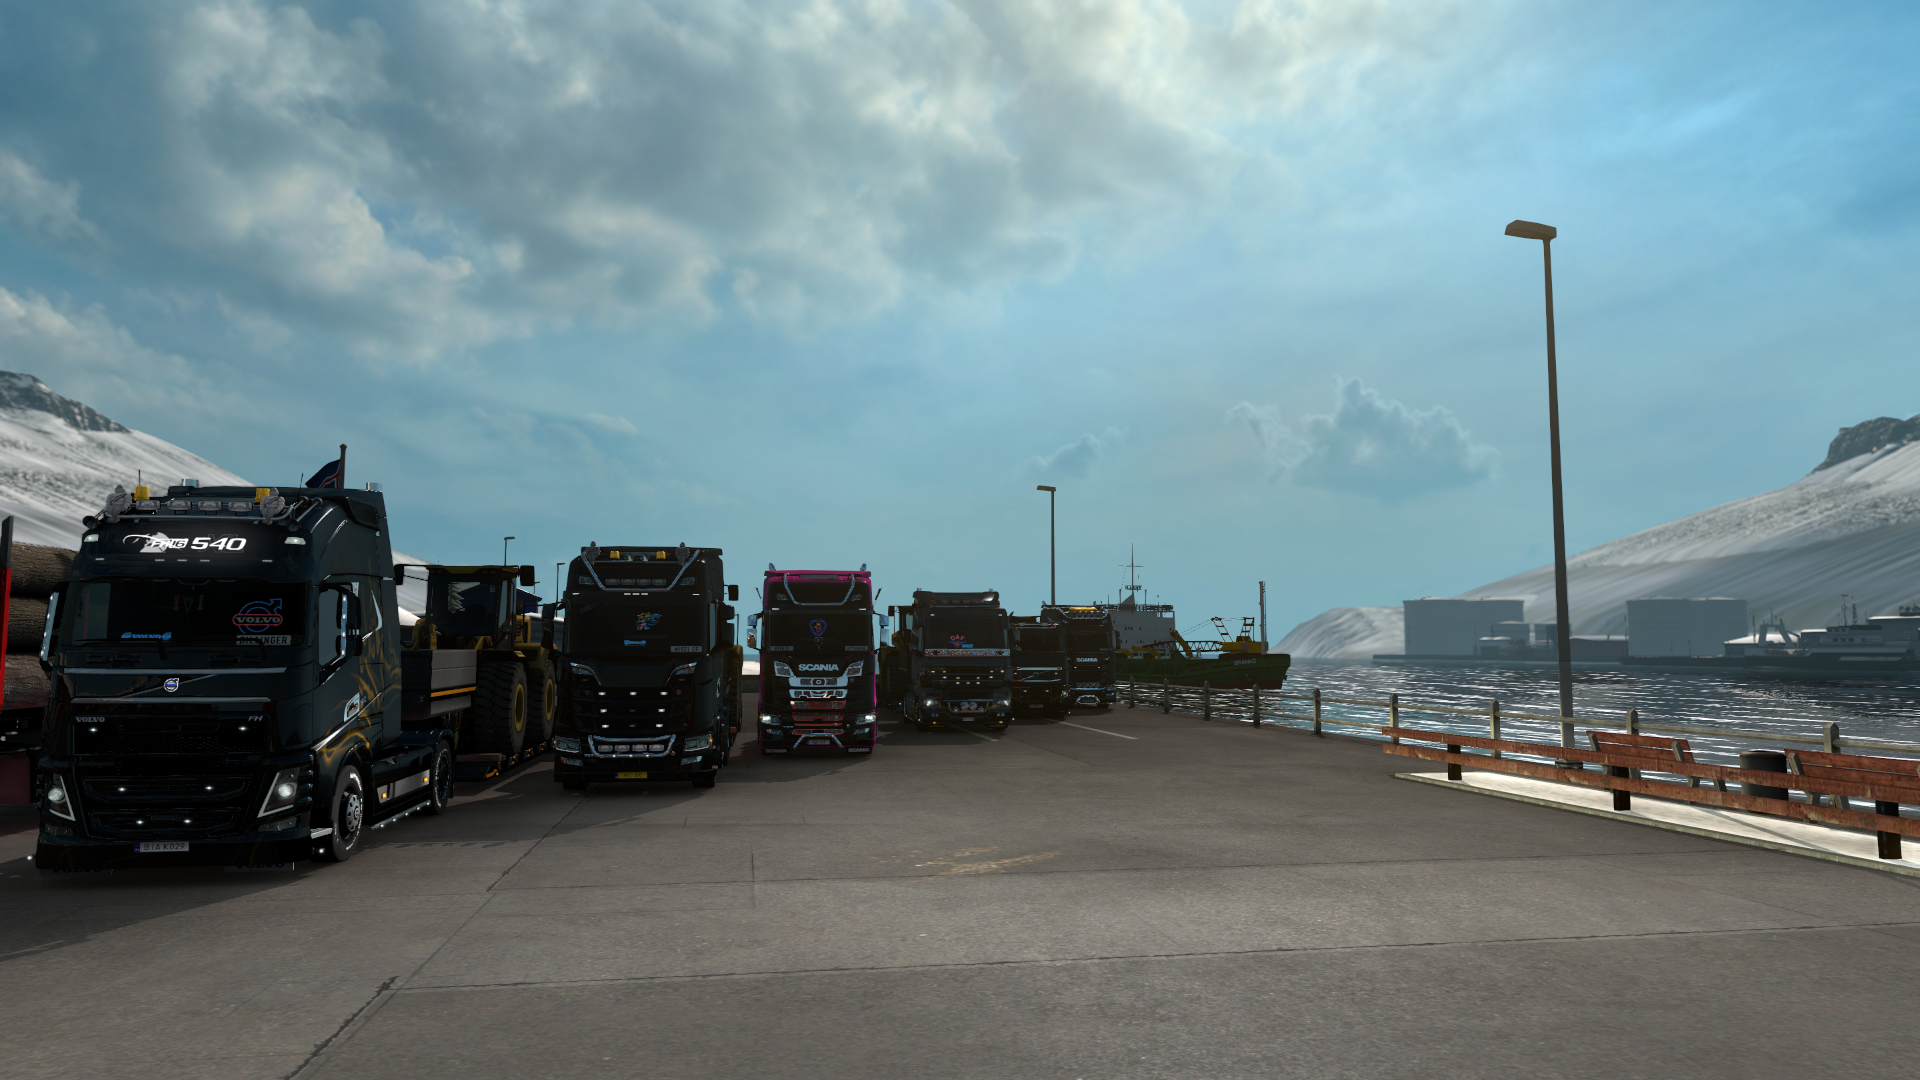 ets2_20210320_222831_00.png